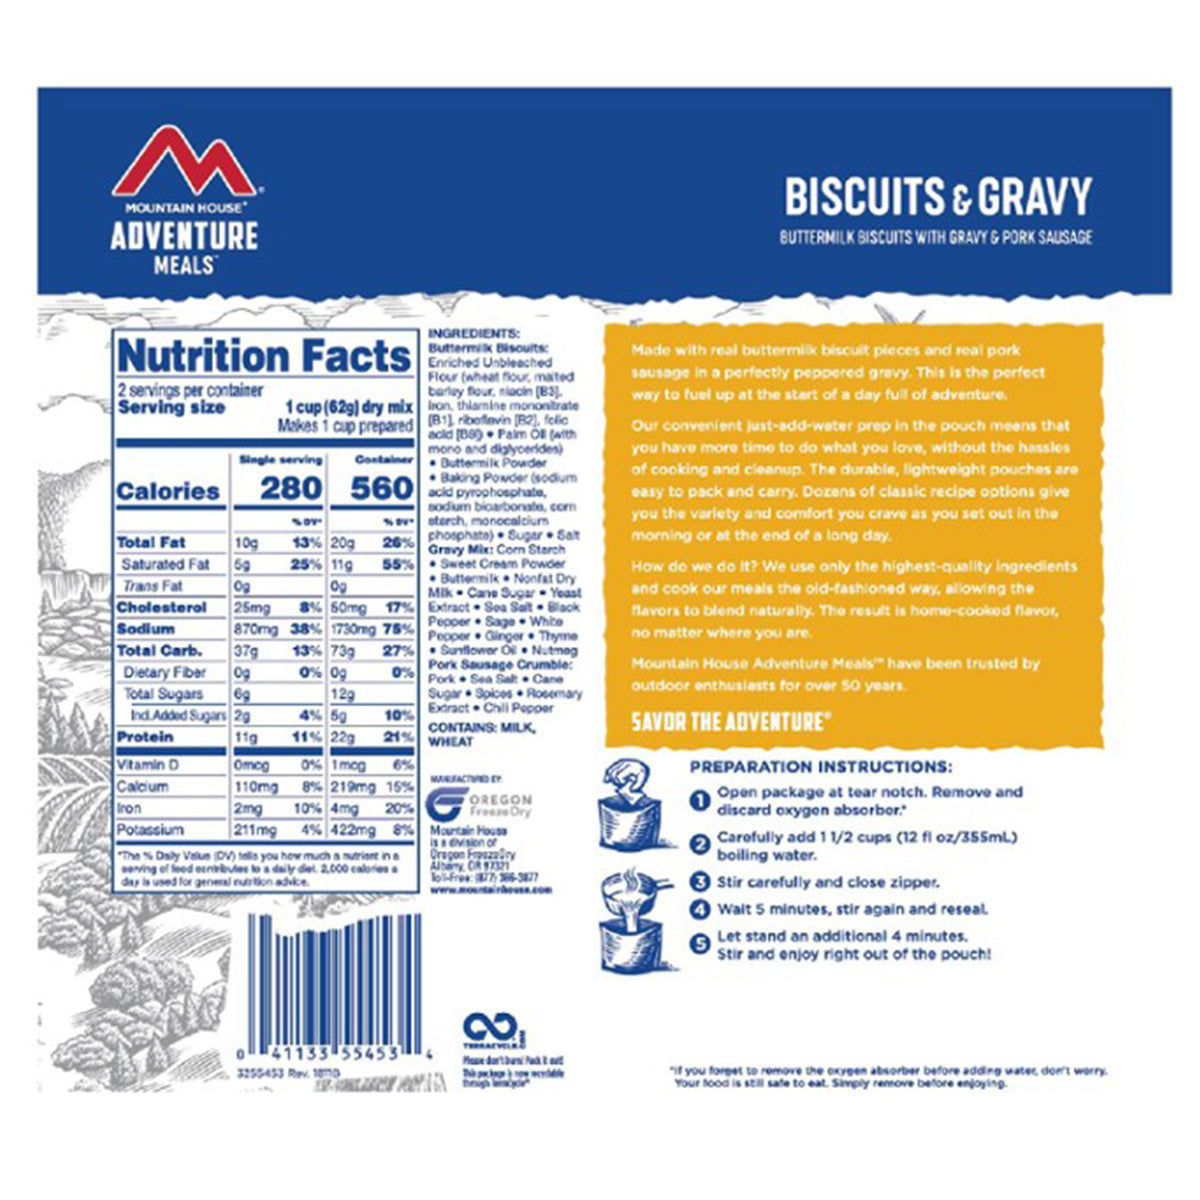 Mountain House Biscuits & Gravy in Mountain House Biscuits & Gravy - goHUNT Shop by GOHUNT | Mountain House - GOHUNT Shop